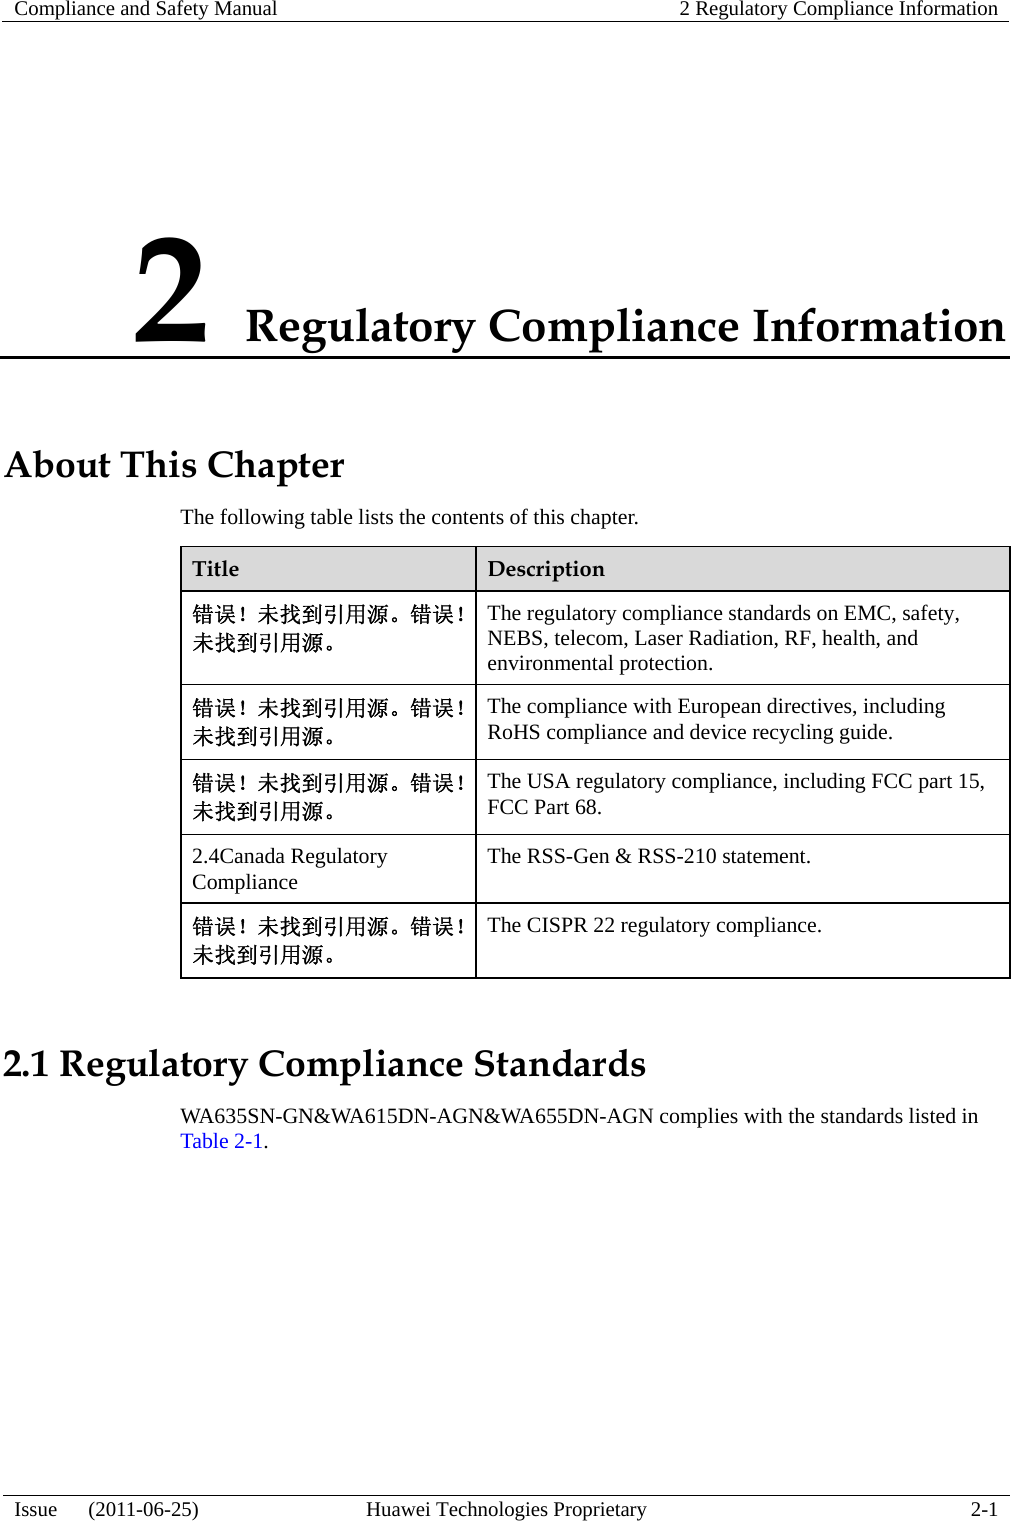 Compliance and Safety Manual  2 Regulatory Compliance Information  Issue   (2011-06-25)  Huawei Technologies Proprietary  2-1 2 Regulatory Compliance Information About This Chapter The following table lists the contents of this chapter. Title  Description 错误！未找到引用源。错误！未找到引用源。 The regulatory compliance standards on EMC, safety, NEBS, telecom, Laser Radiation, RF, health, and environmental protection. 错误！未找到引用源。错误！未找到引用源。 The compliance with European directives, including RoHS compliance and device recycling guide. 错误！未找到引用源。错误！未找到引用源。 The USA regulatory compliance, including FCC part 15, FCC Part 68. 2.4Canada Regulatory Compliance  The RSS-Gen &amp; RSS-210 statement. 错误！未找到引用源。错误！未找到引用源。 The CISPR 22 regulatory compliance. 2.1 Regulatory Compliance Standards WA635SN-GN&amp;WA615DN-AGN&amp;WA655DN-AGN complies with the standards listed in Table 2-1. 